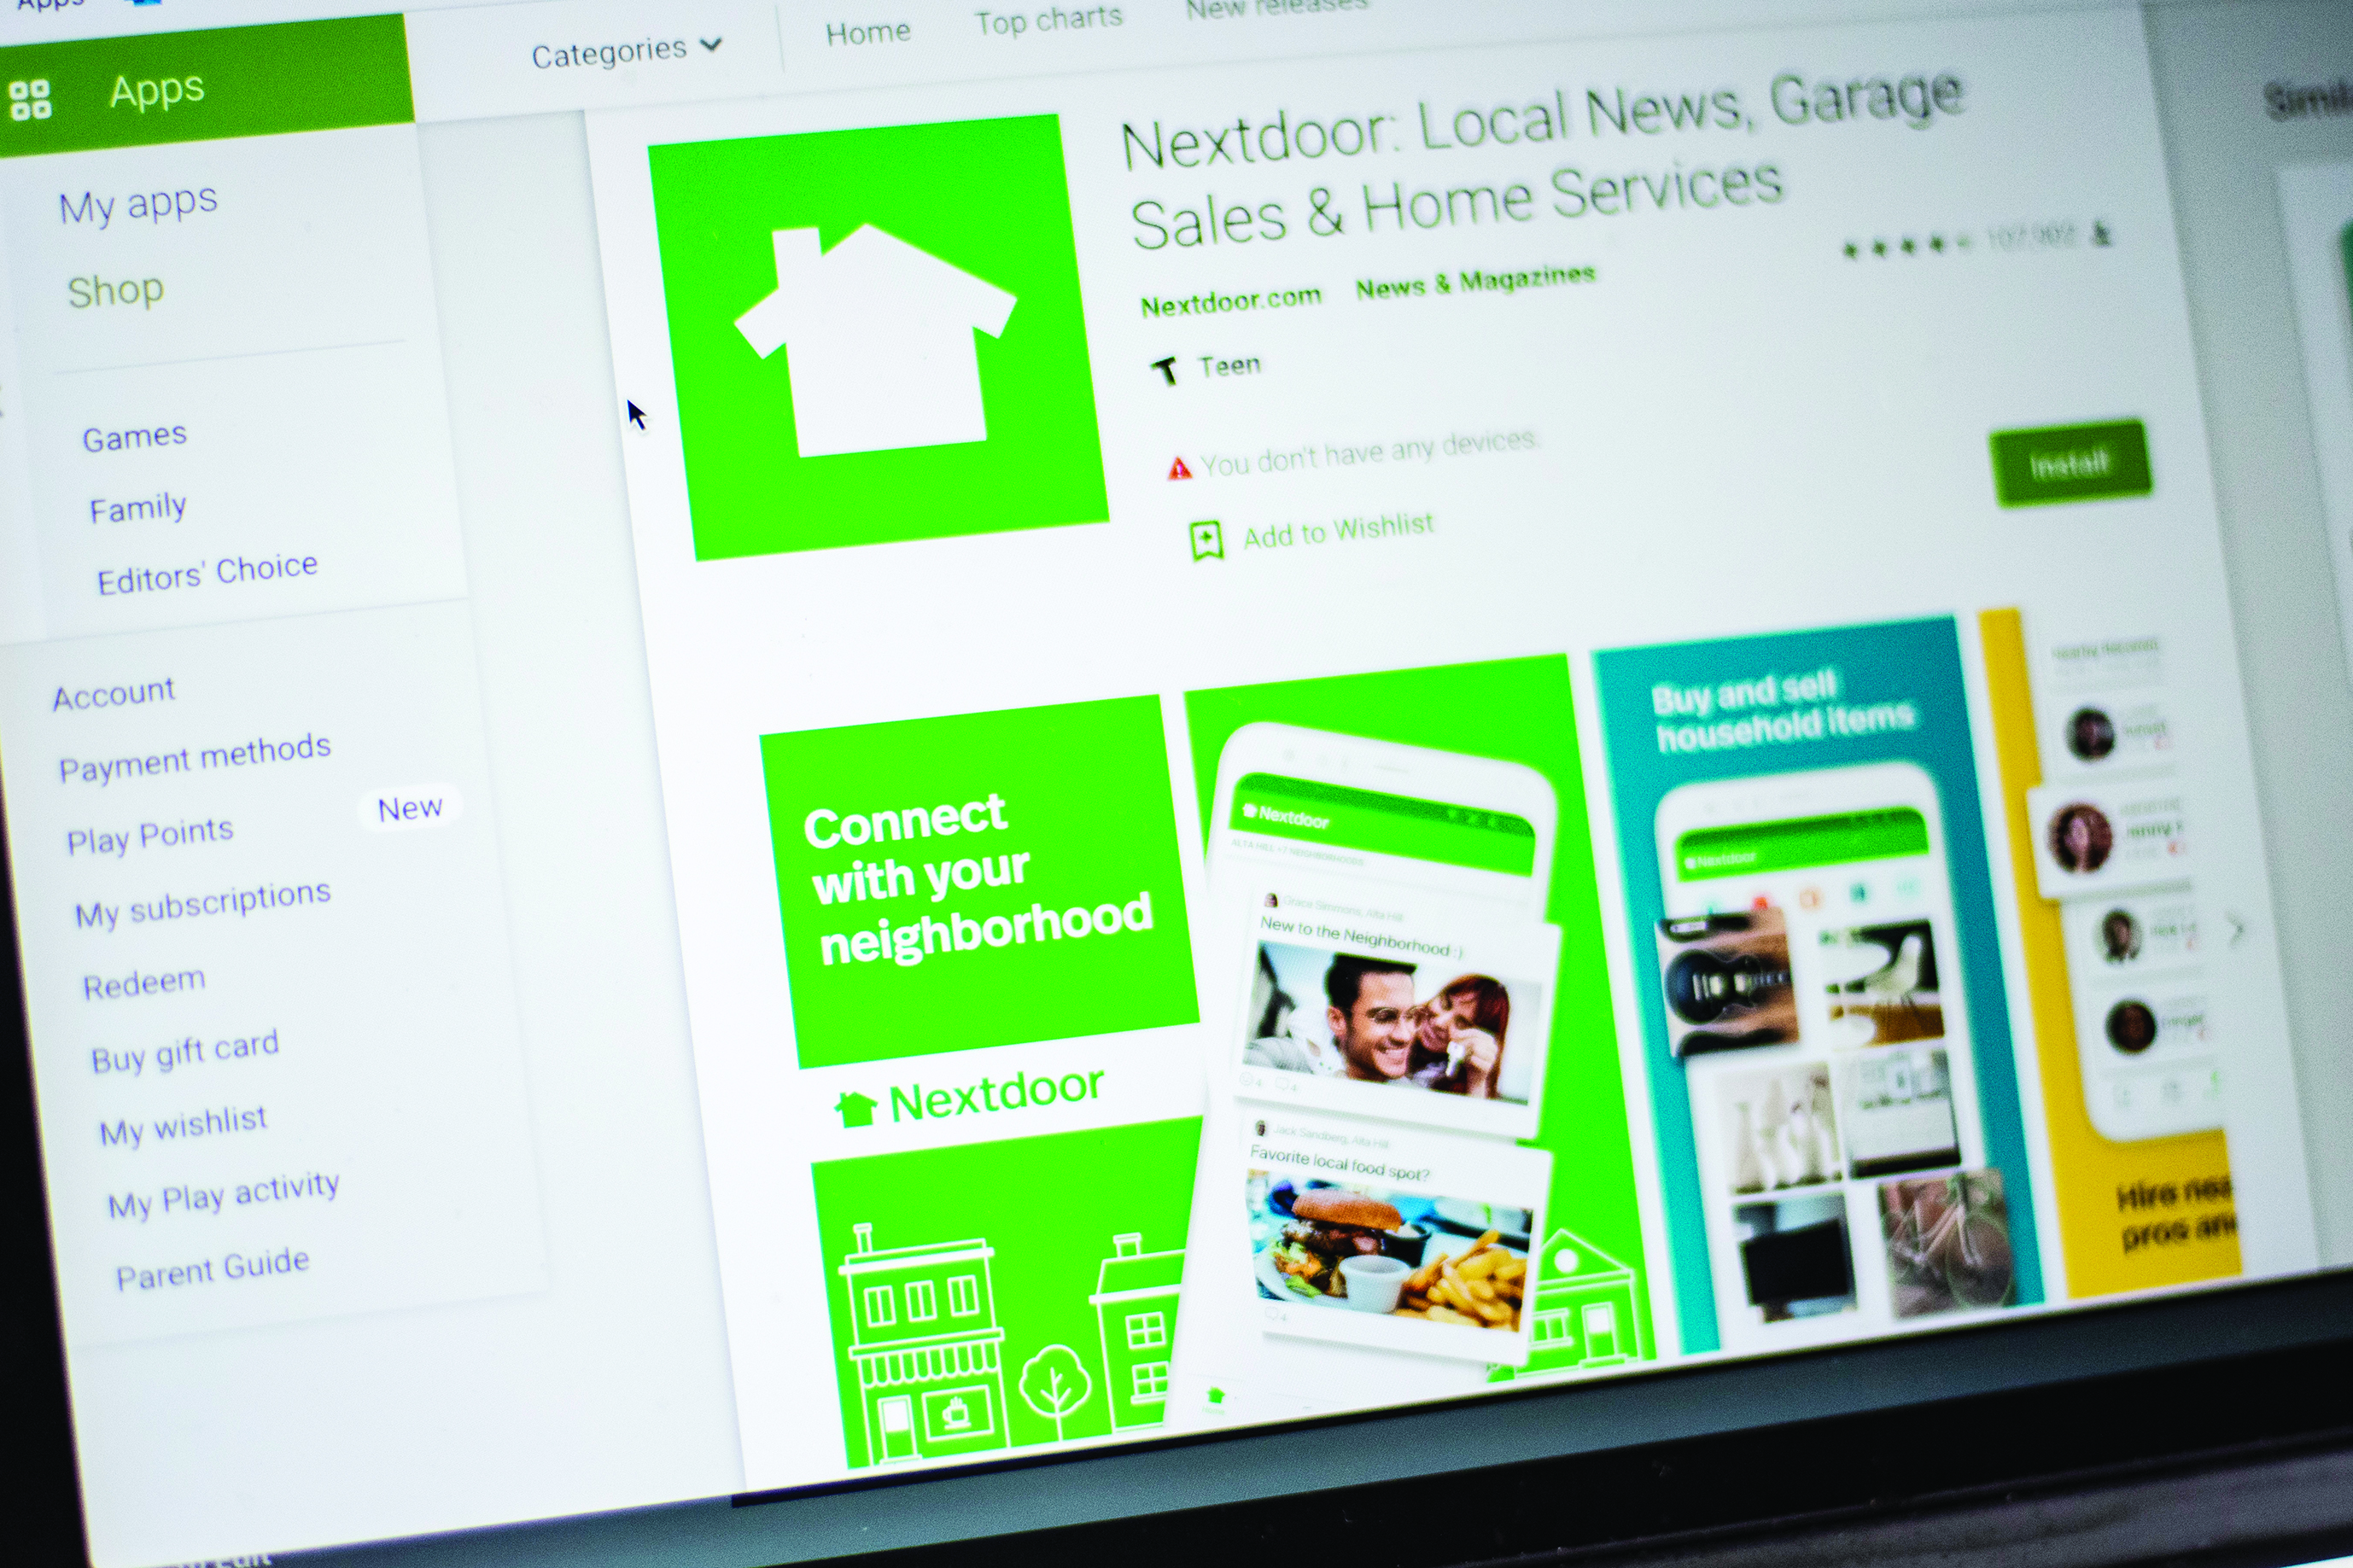 Nextdoor, the hyper local social network, is seen on a computer screen in Washington, DC, on March 27, 2020. - There are offers to pick up groceries or medicine for neighbors, to share supplies, or walk people's dogs. And exchange information on where to find scarce items like toilet paper.  For people forced to stay home to ride out the coronavirus pandemic, Nextdoor, the hyperlocal social network, has found itself playing an increasingly important role. (Photo by Eric BARADAT / AFP)